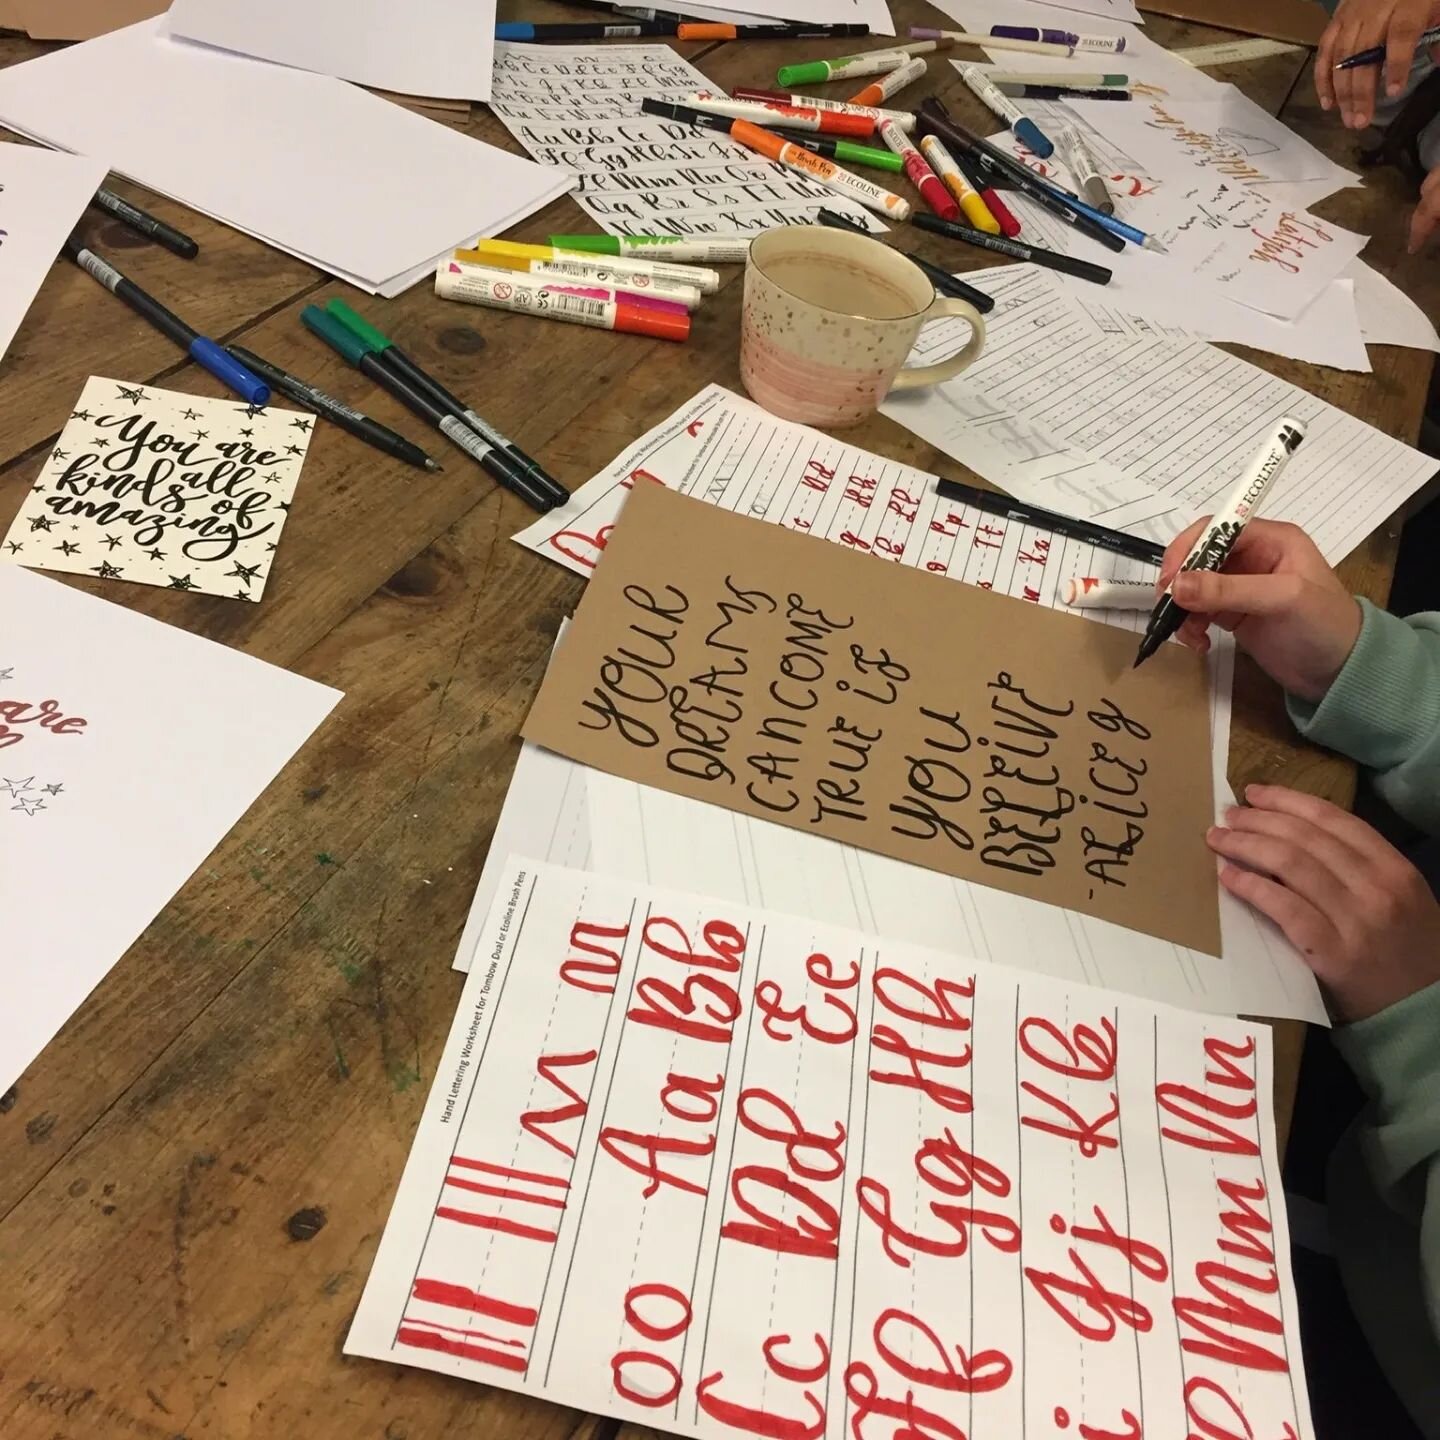 The January term is off to a busy start! We had such a brilliant workshop with the wonderful @laura.buckland yesterday - our young people loved learning calligraphy, and what a great way to take care of your wellbeing whilst learning something new an